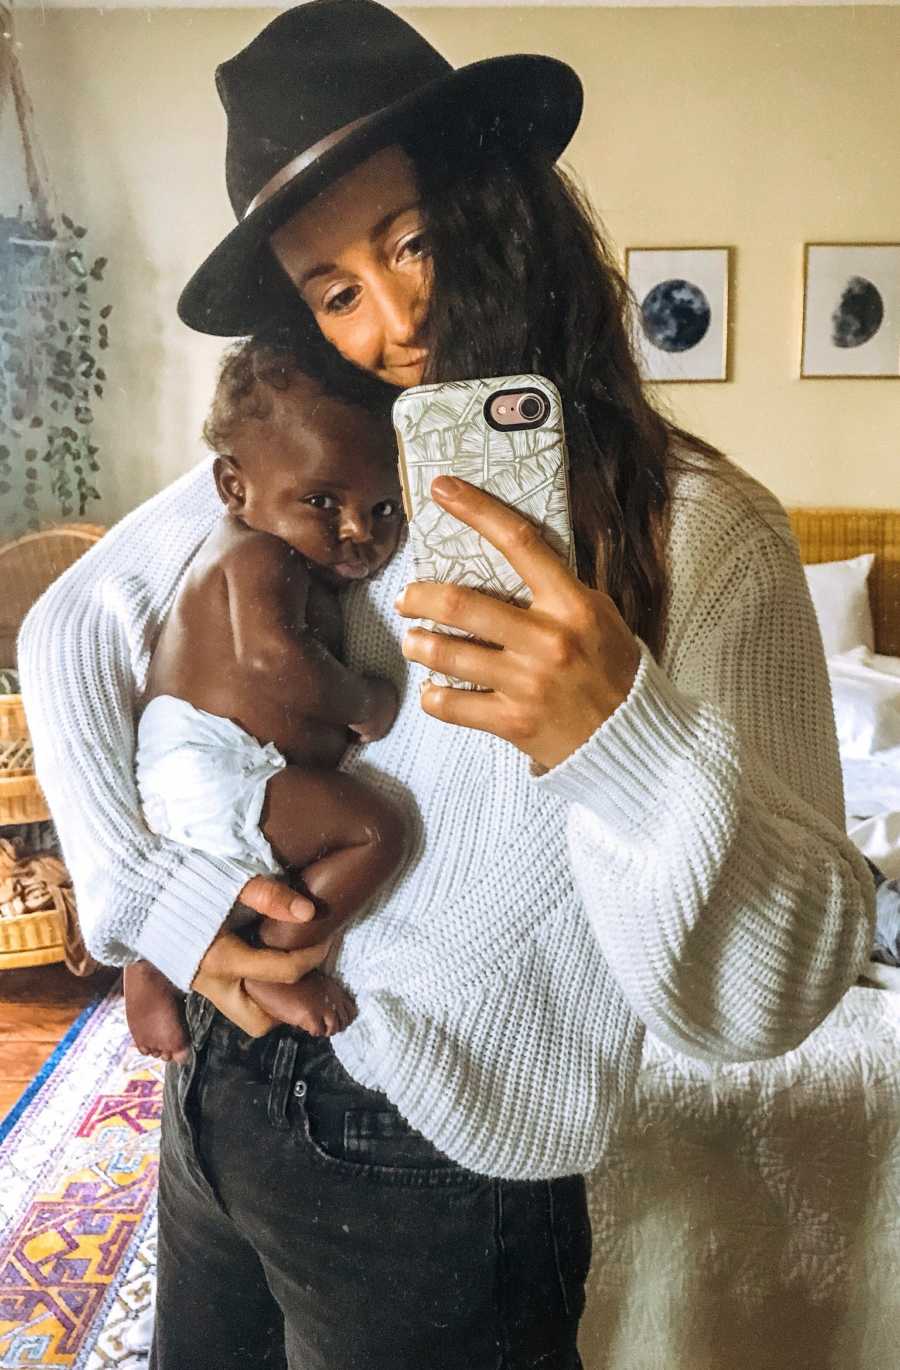 Mother smiles in mirror selfie while holding adopted baby